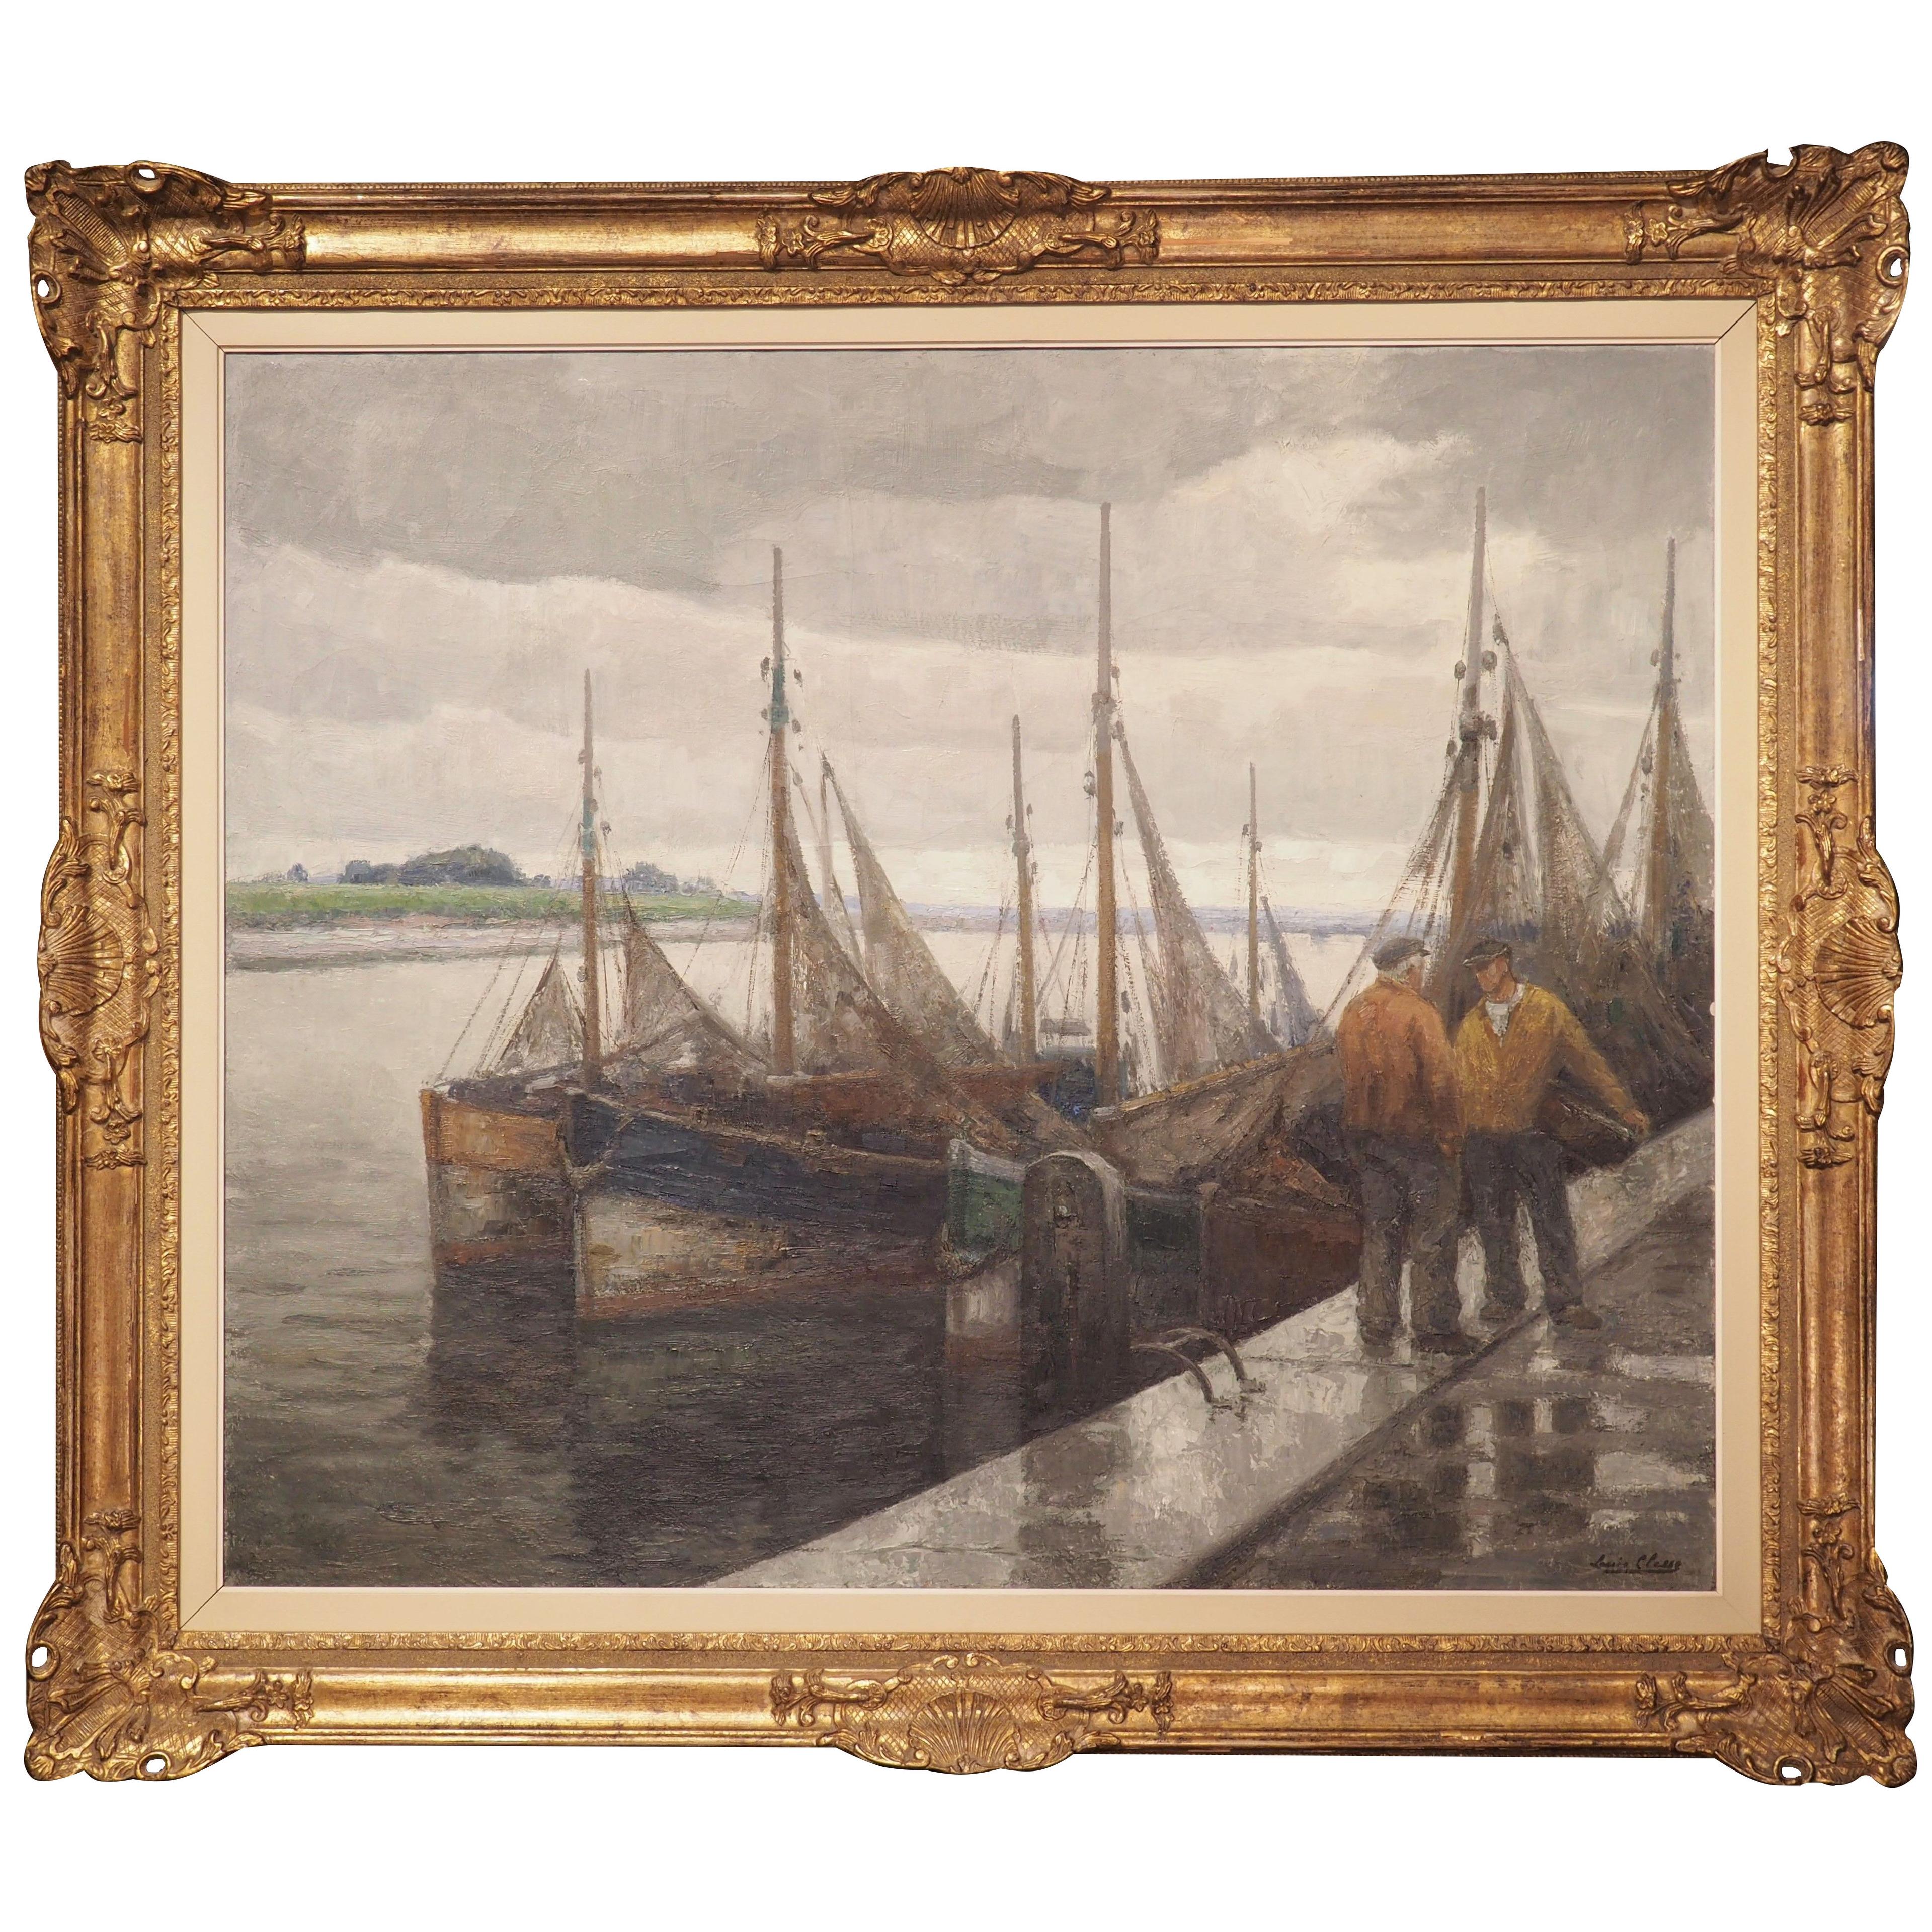 Large Oil on Canvas in Giltwood Frame, “Fishing Boats in the Port”, Louis Clesse